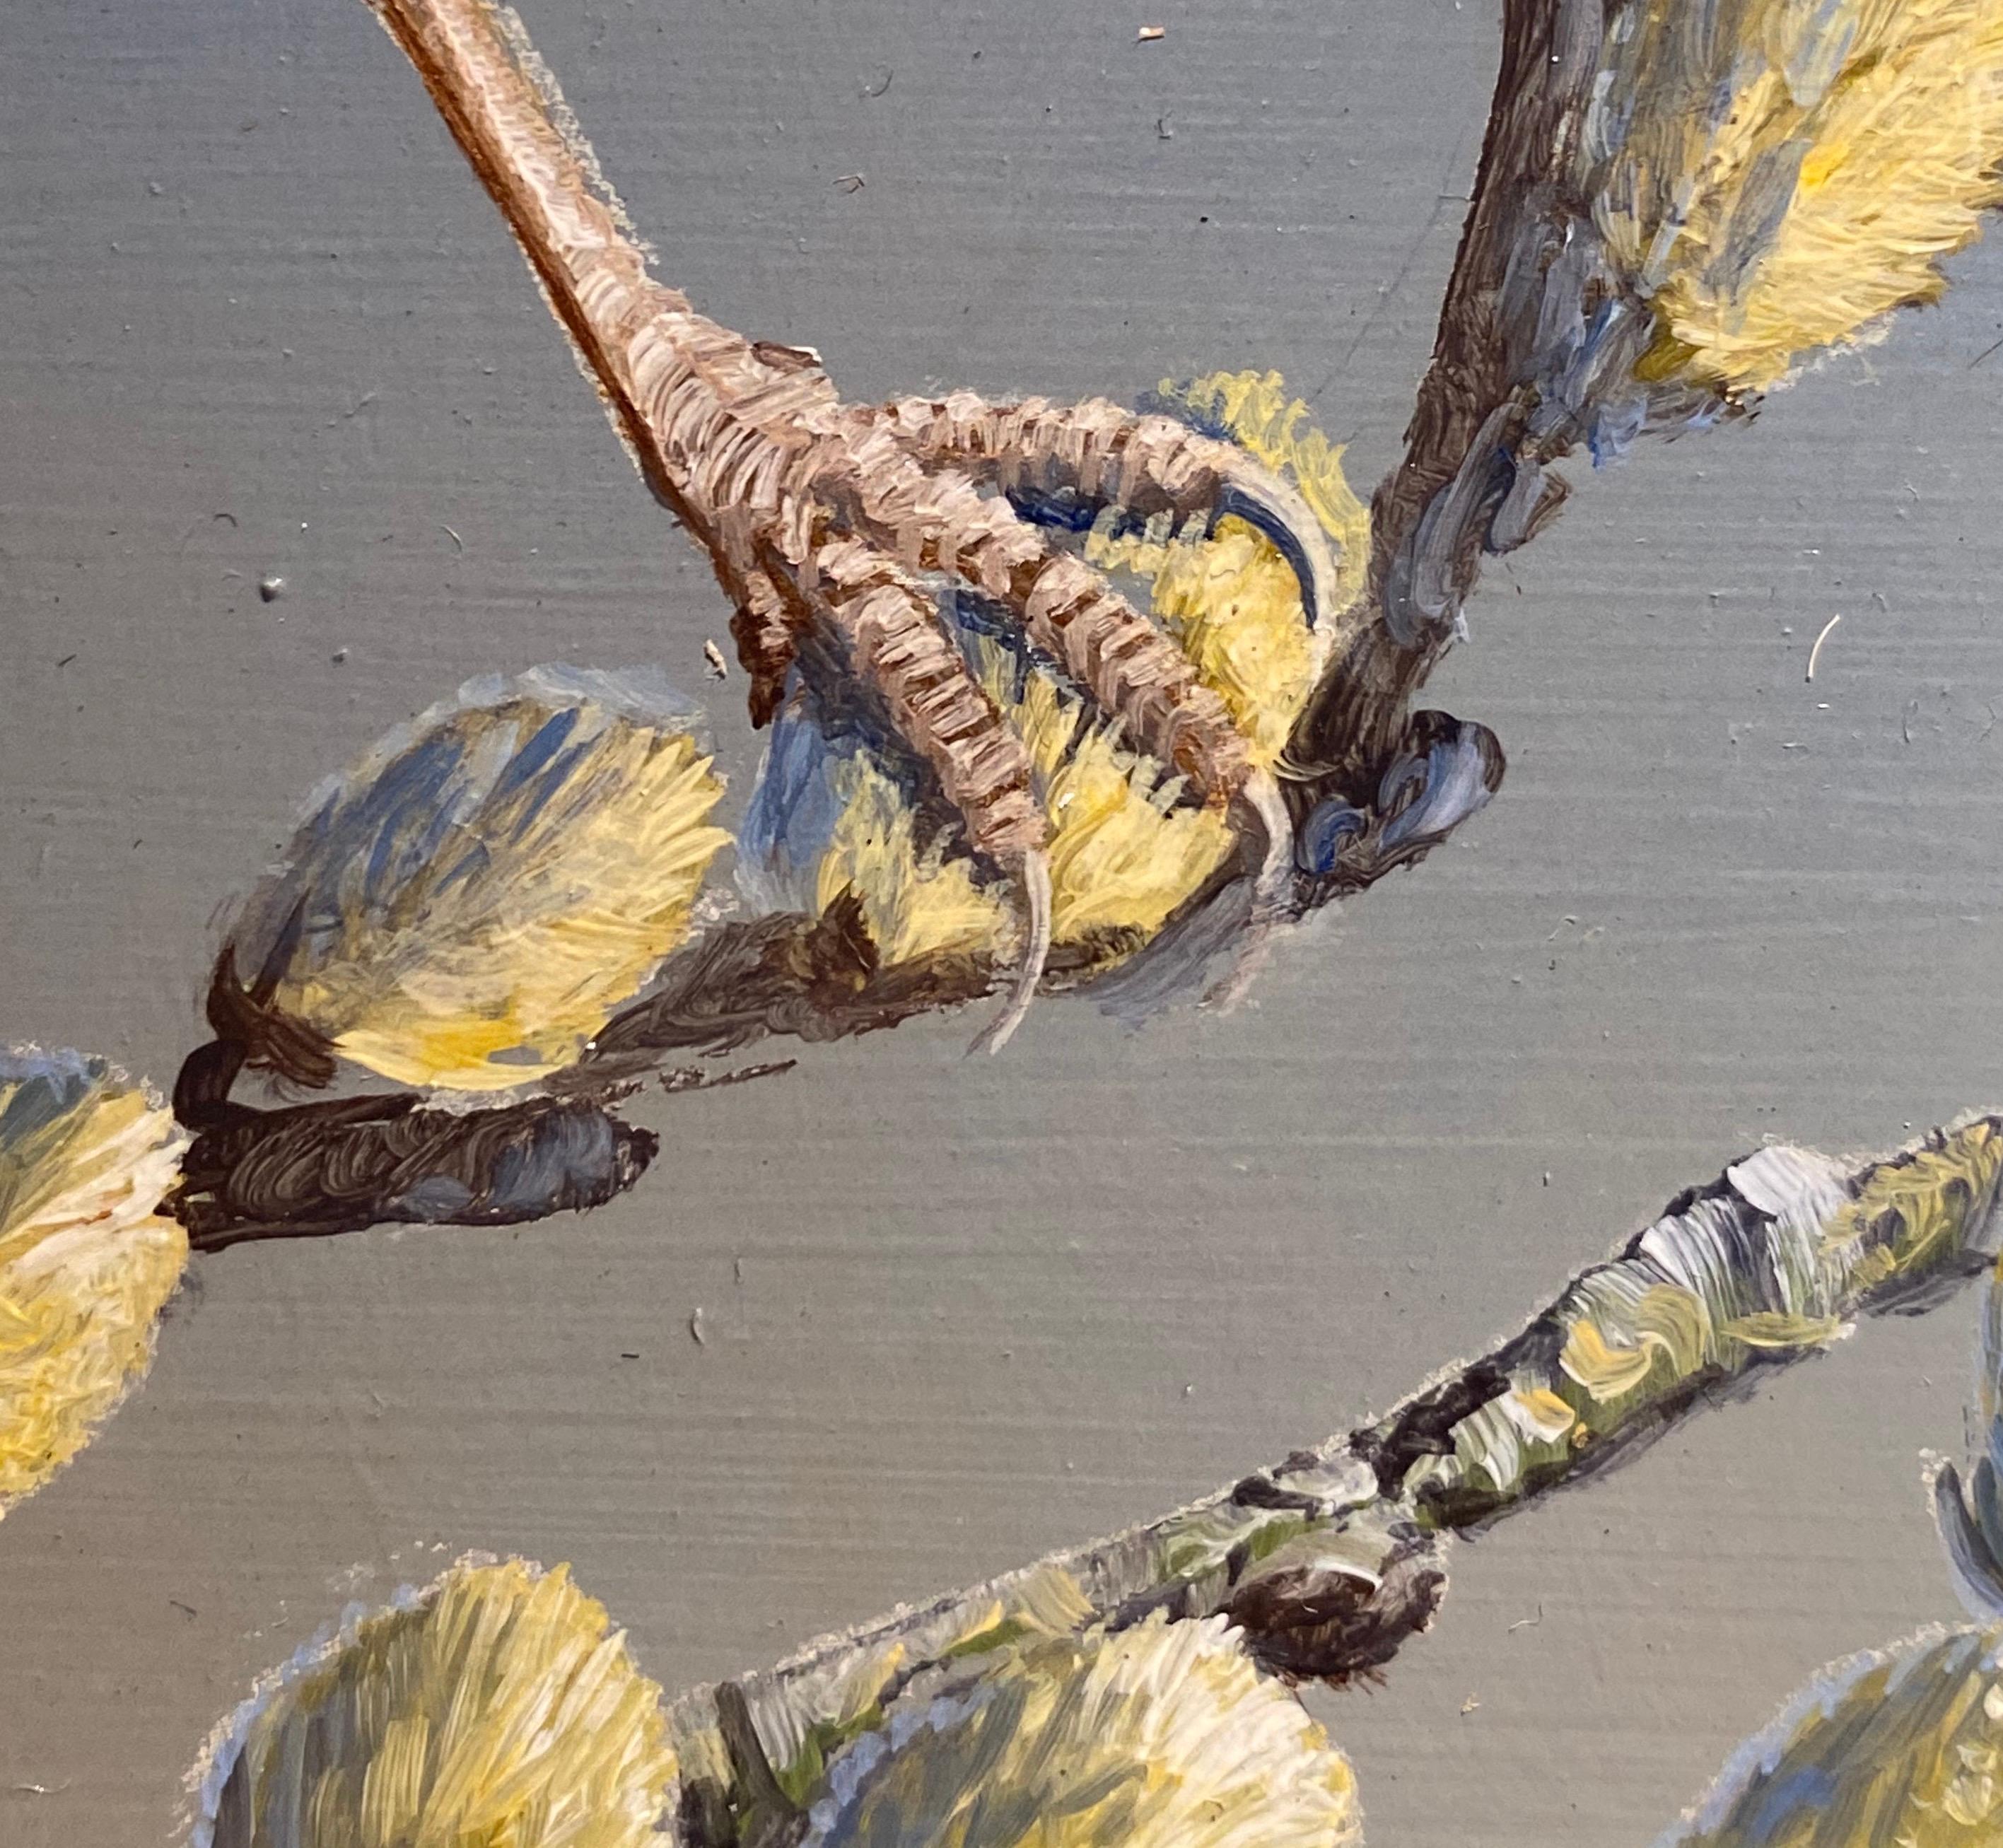 'Ever the Optimist' by Ben Waddams is a Contemporary Realist Wildlife oil painting of an English Wren in the wild on a branch. With a contrasting blue background and incredible detail. 

Ben Waddams is a British wildlife artist living and working in